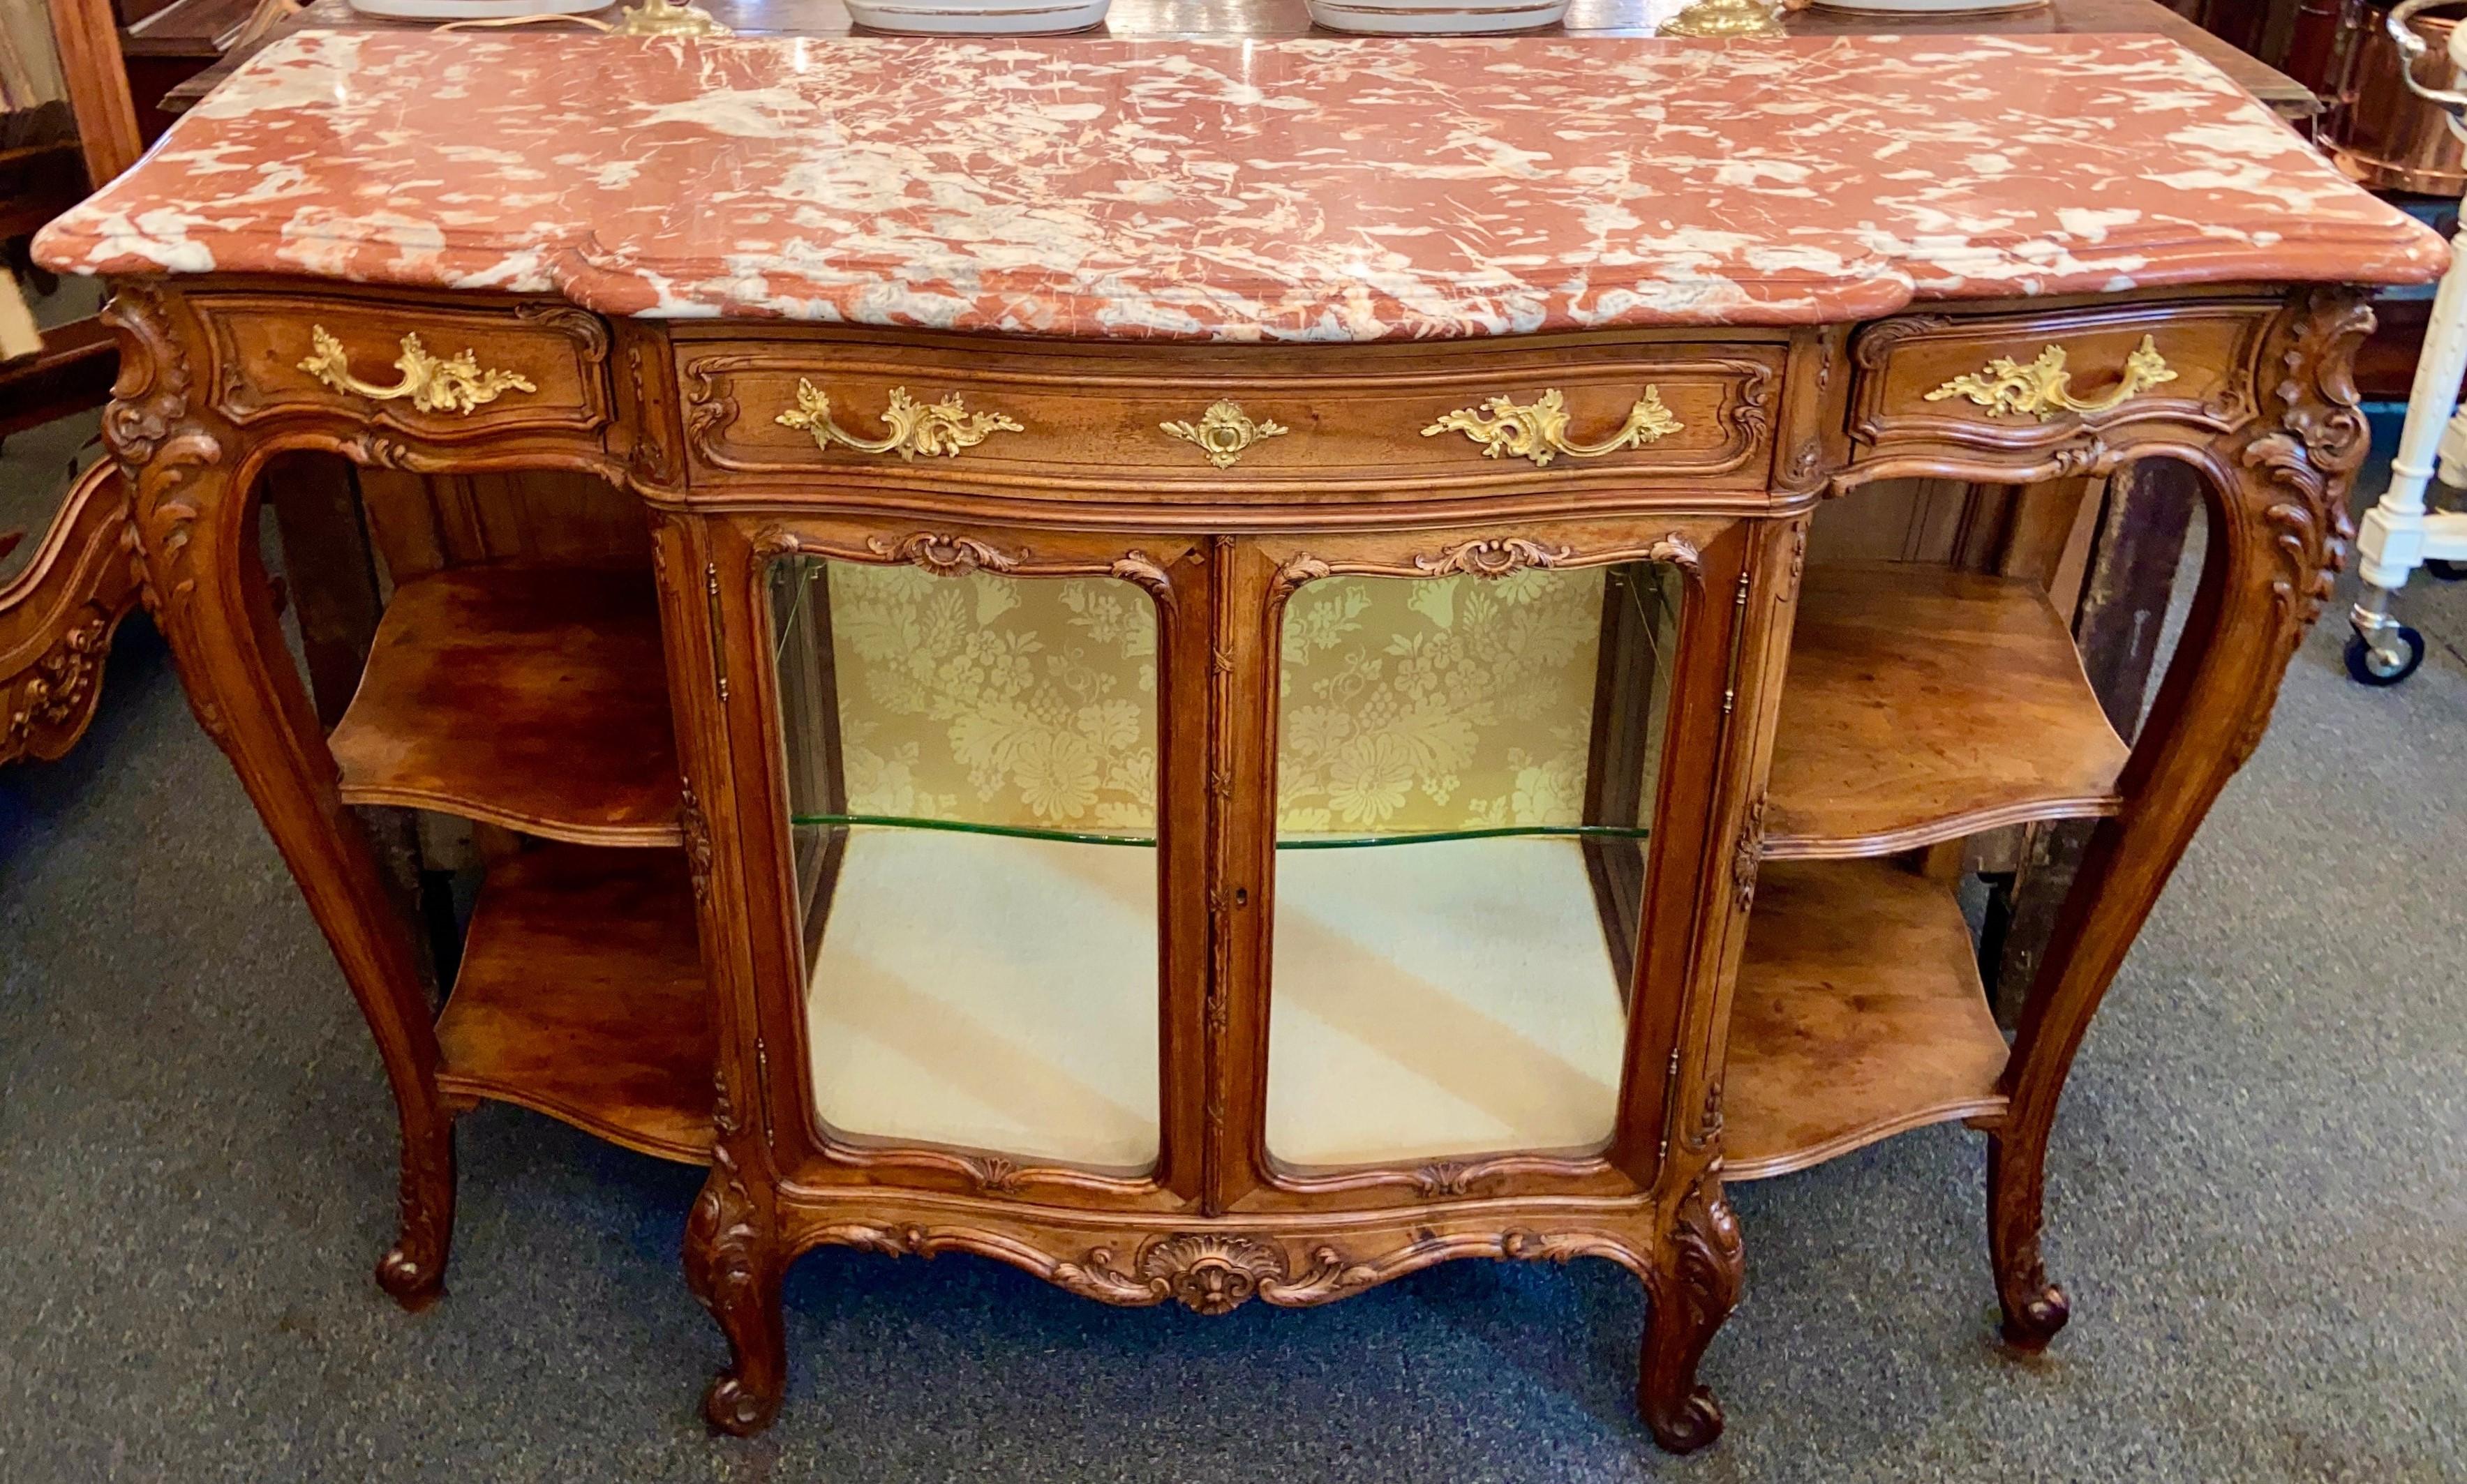 Antique French rouge marble-top walnut buffet with glass doors, Circa 1890-1910.